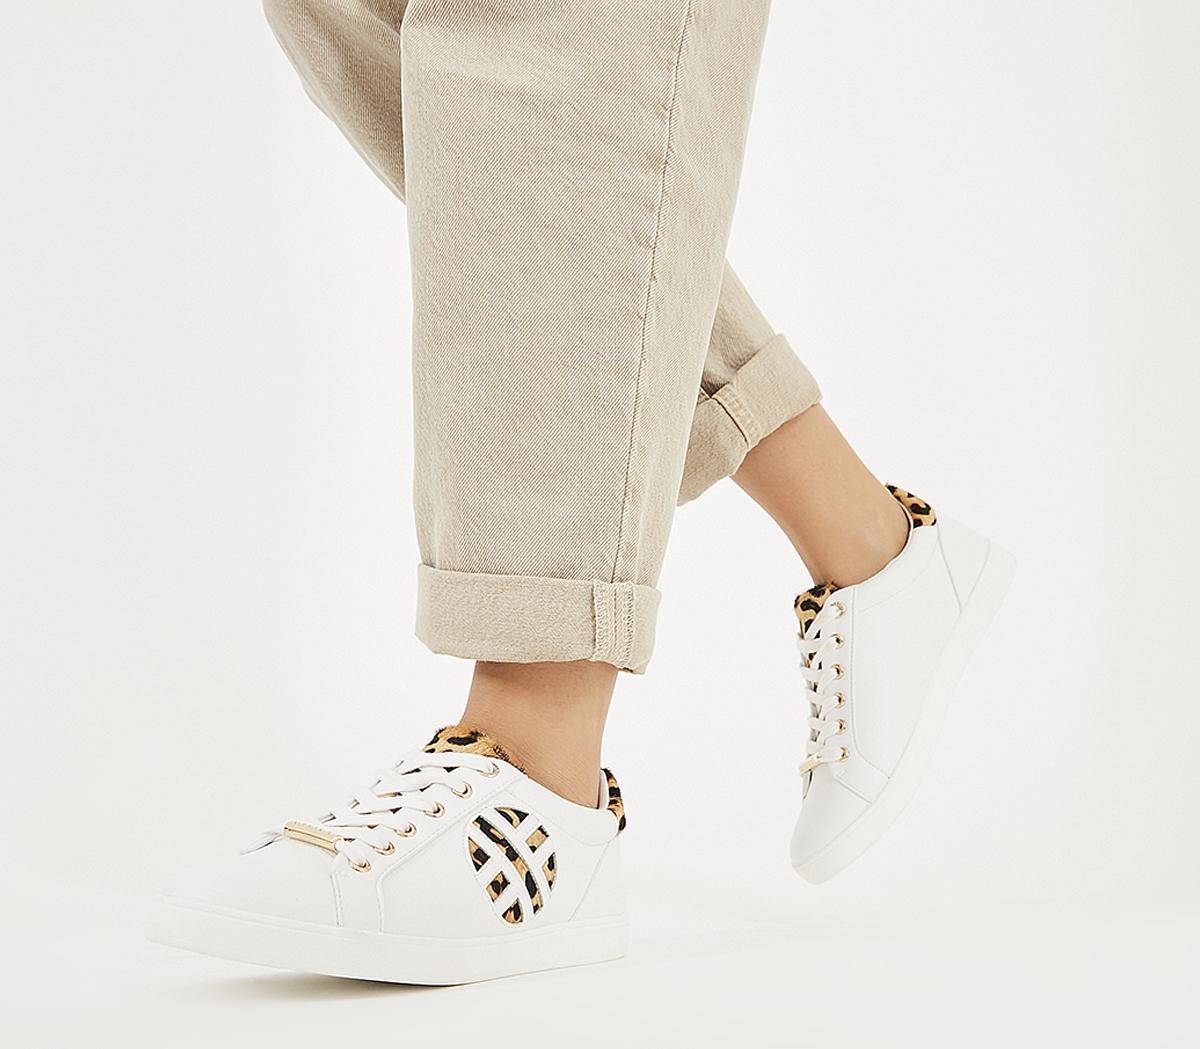 OFFICEFront Row Branded TrainersWhite Leopard Mix